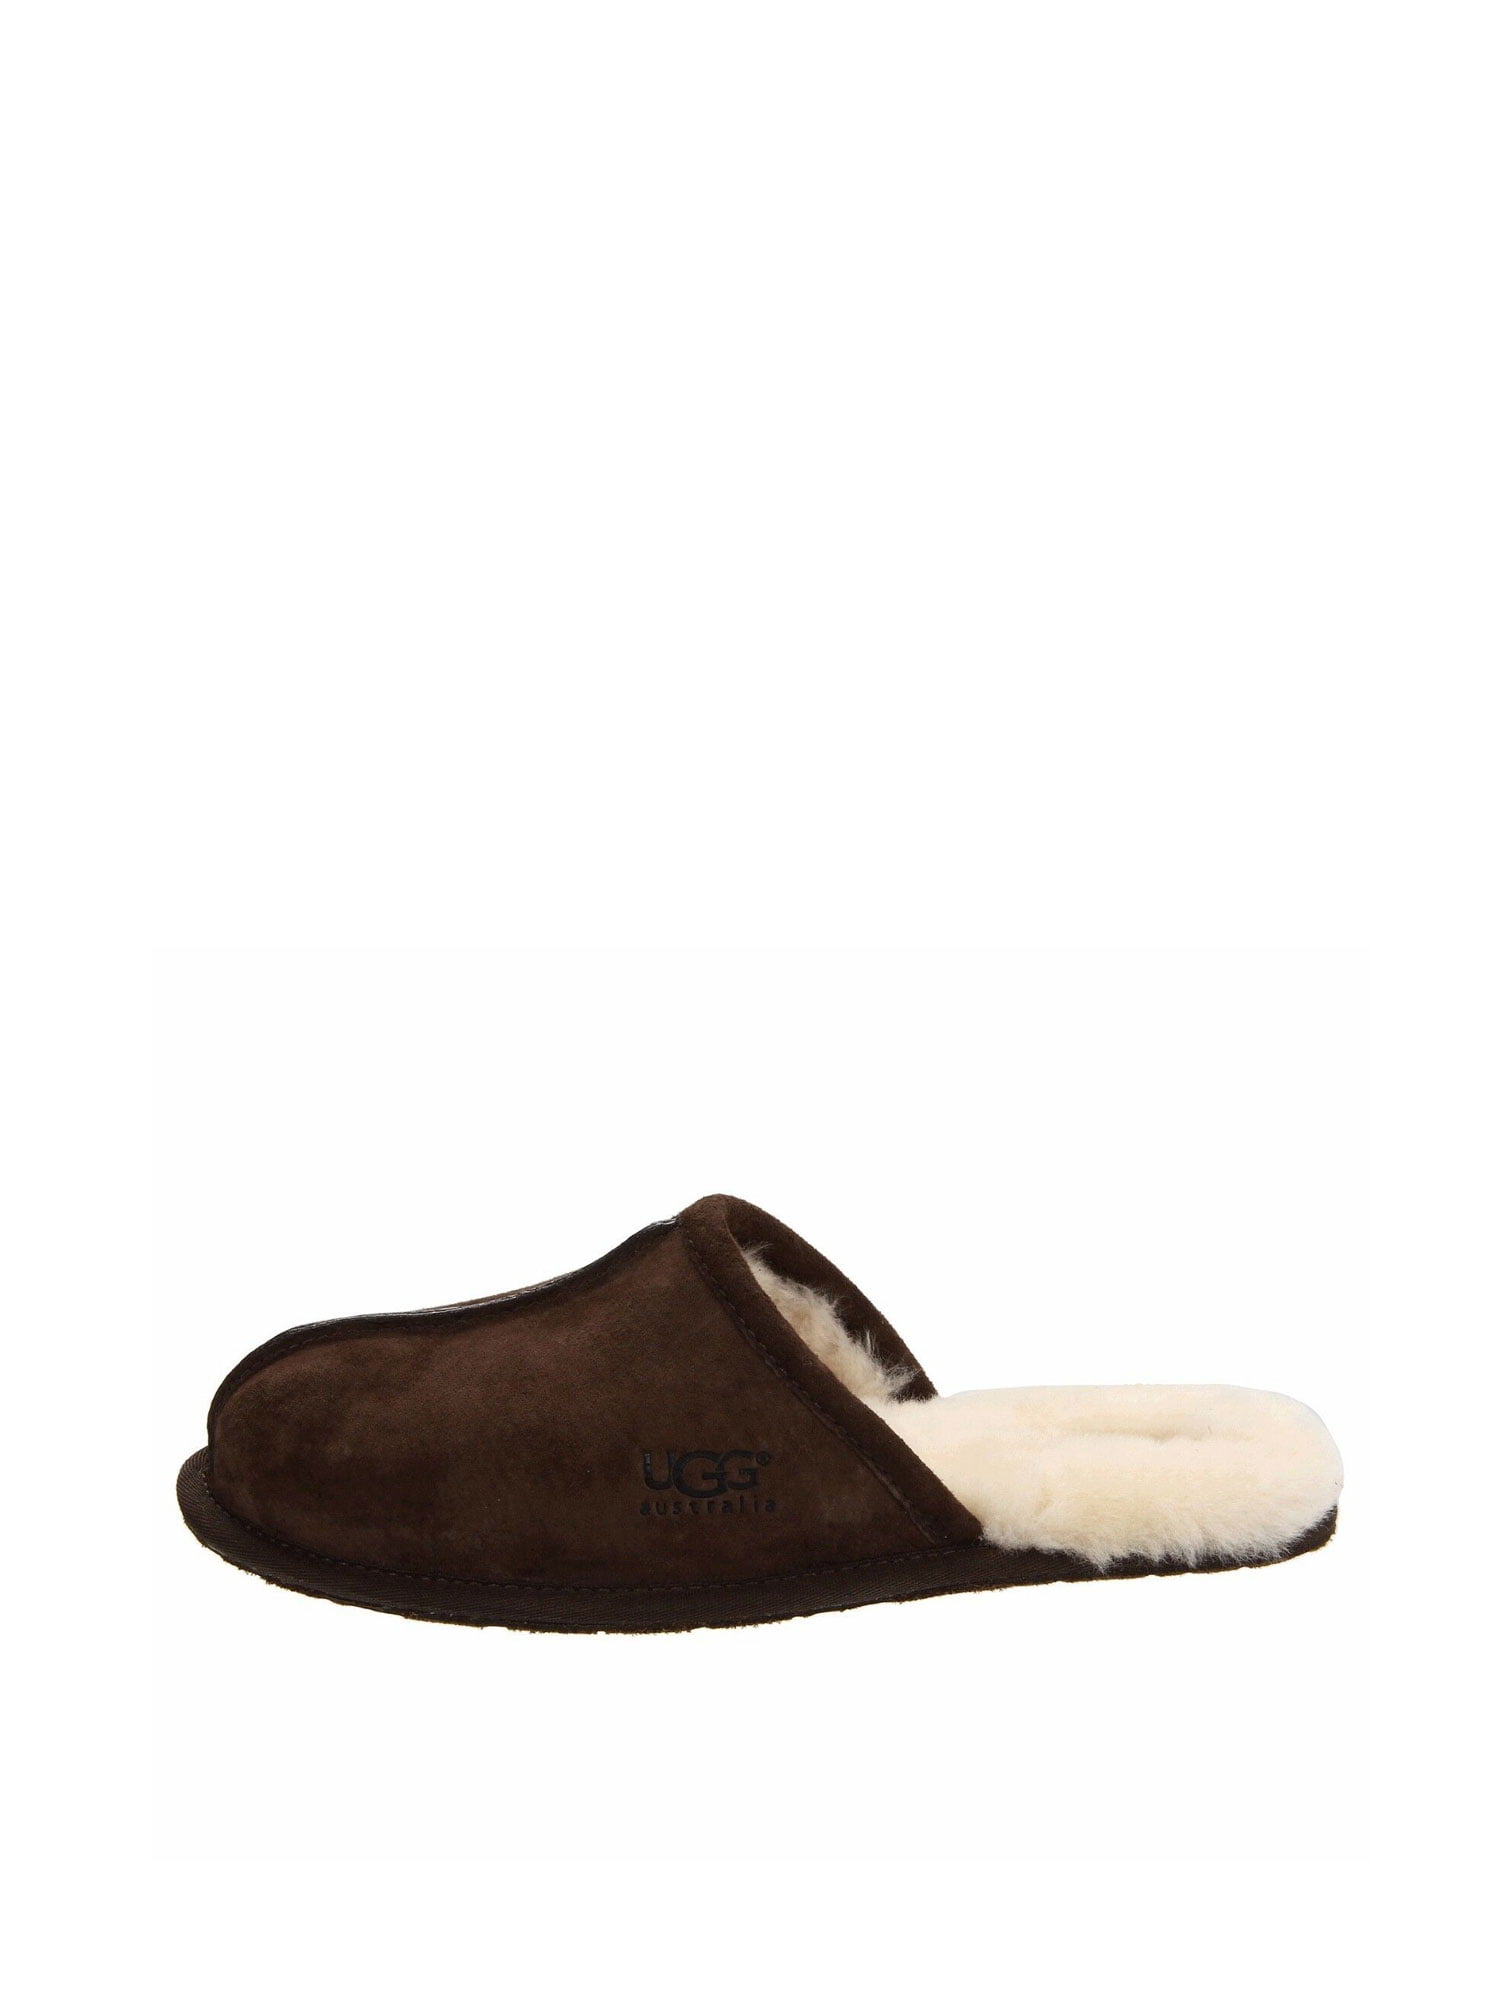 mens ugg scuff slippers on sale